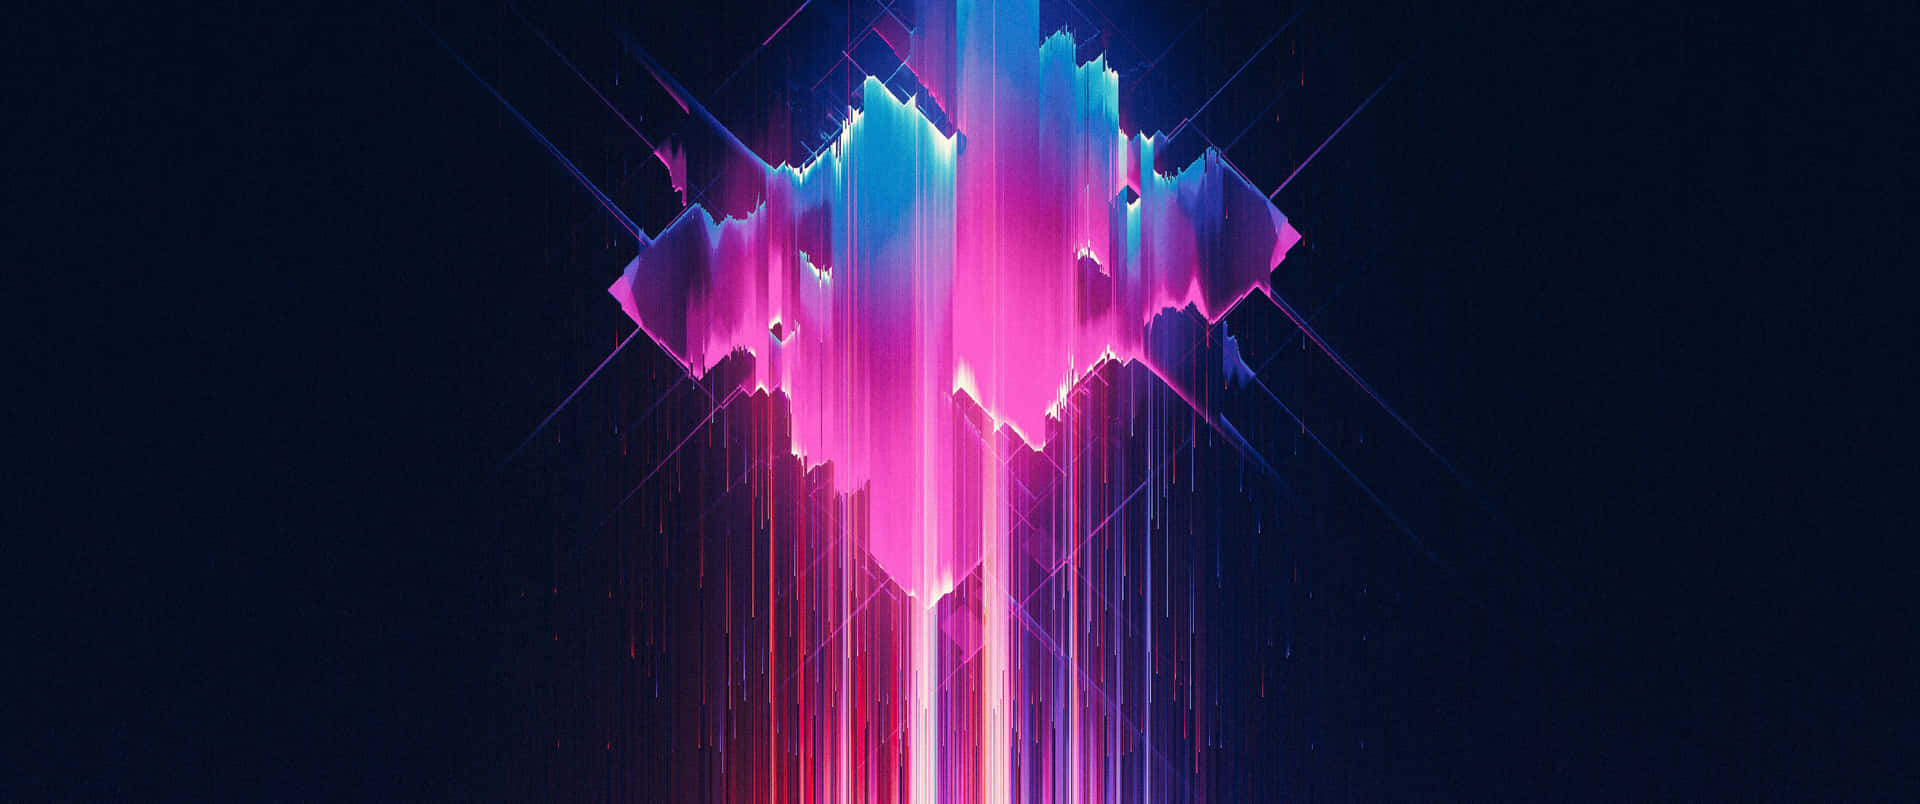 A Colorful Abstract Image Of A Light Source Wallpaper